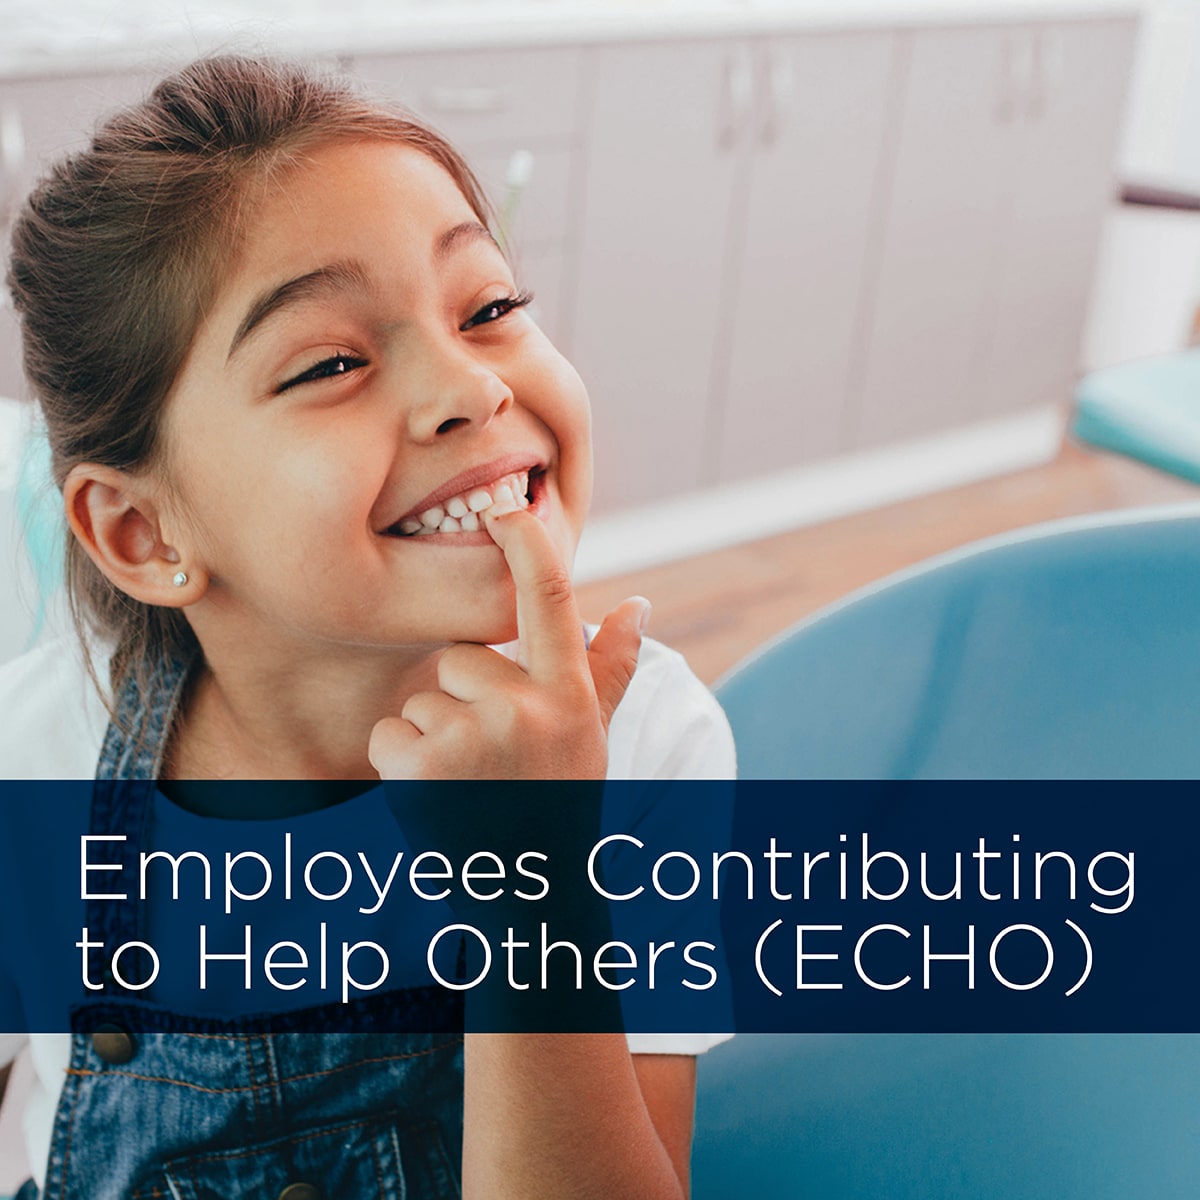 Employees Contributing to Help Others (ECHO)